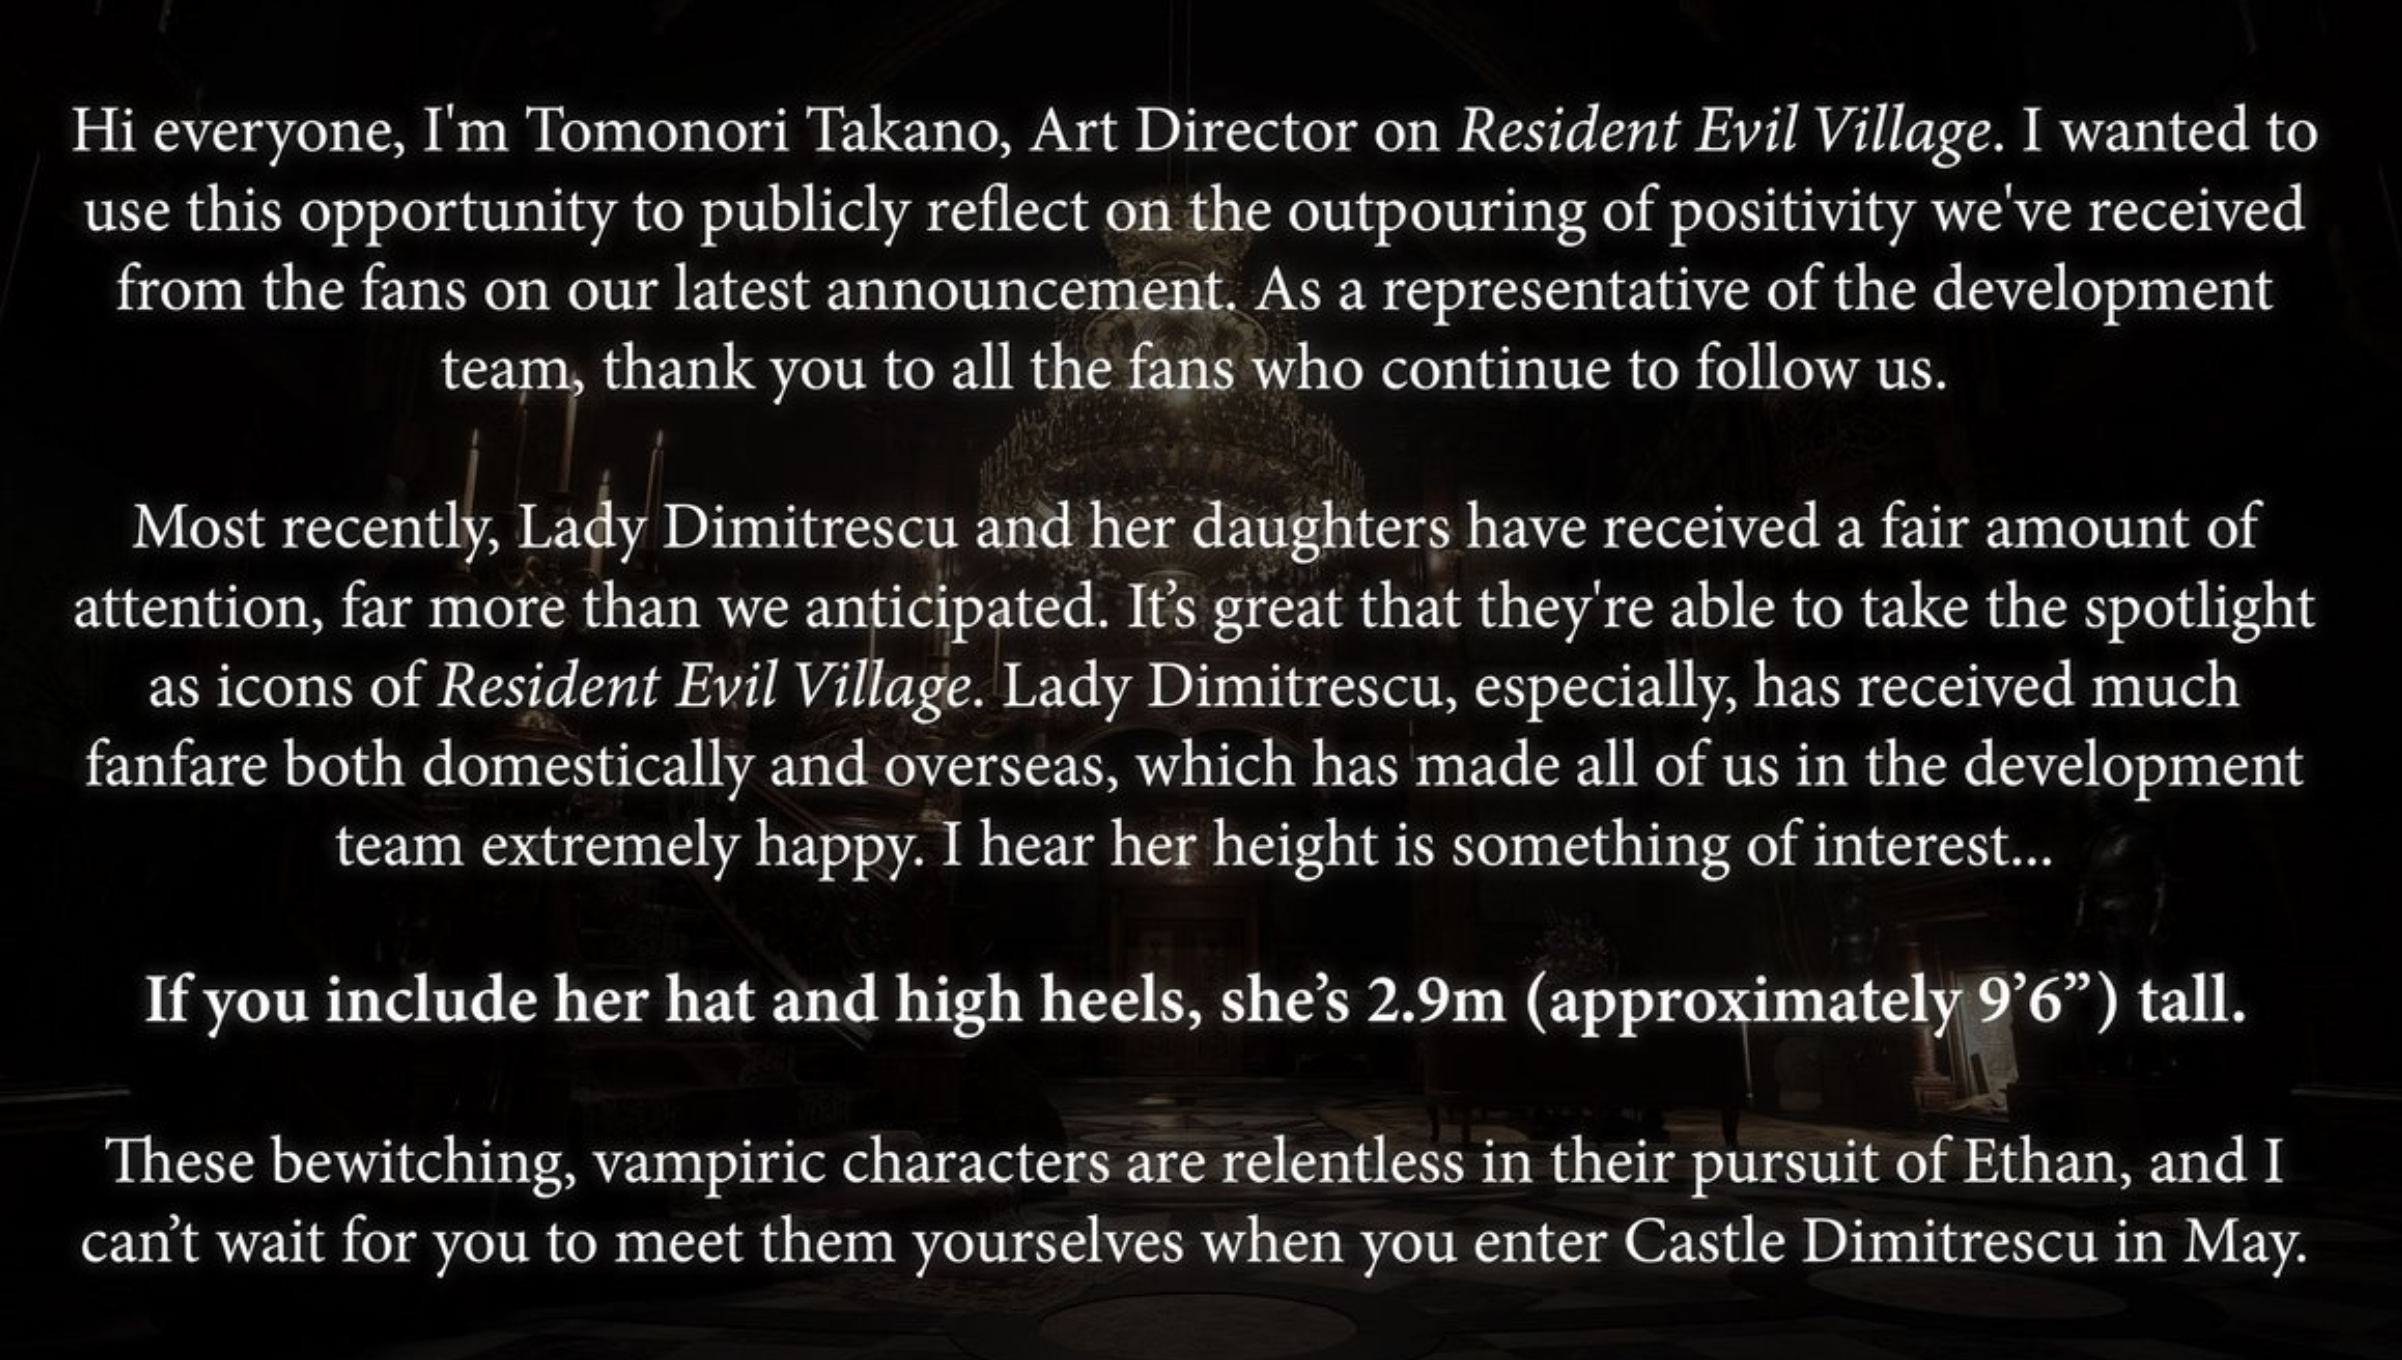 Lady Dimitrescu 9 foot 6 - Hi everyone, I'm Tomonori Takano, Art Director on Resident Evil Village. I wanted to use this opportunity to publicly reflect on the outpouring of positivity we've received from the fans on our latest announcement. As a represen